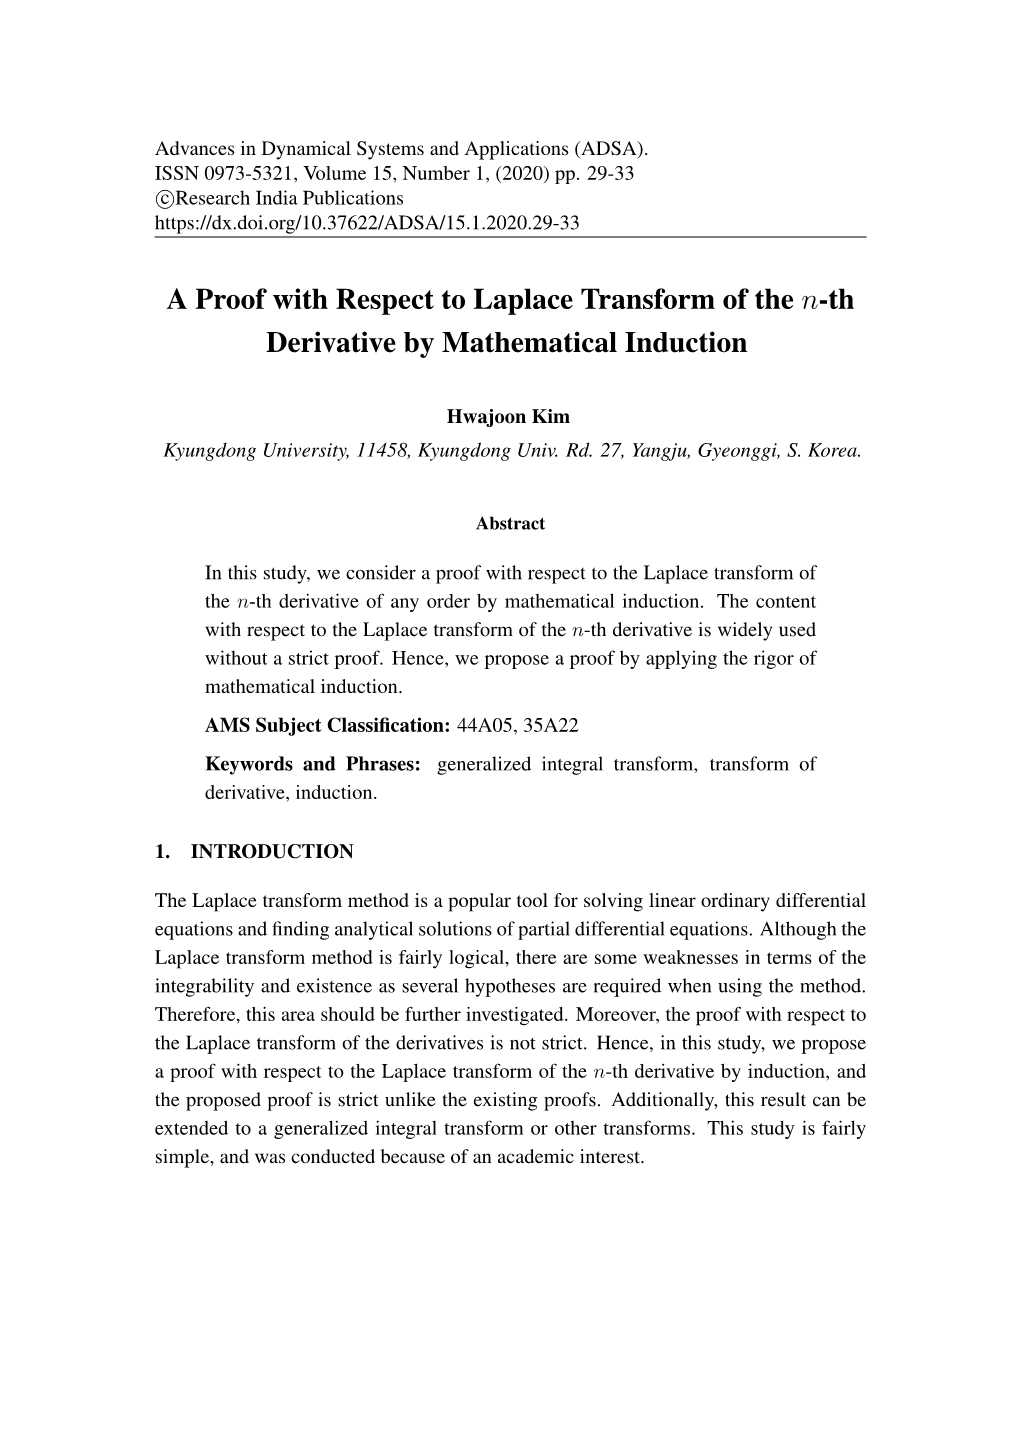 A Proof with Respect to Laplace Transform of the N-Th Derivative by Mathematical Induction